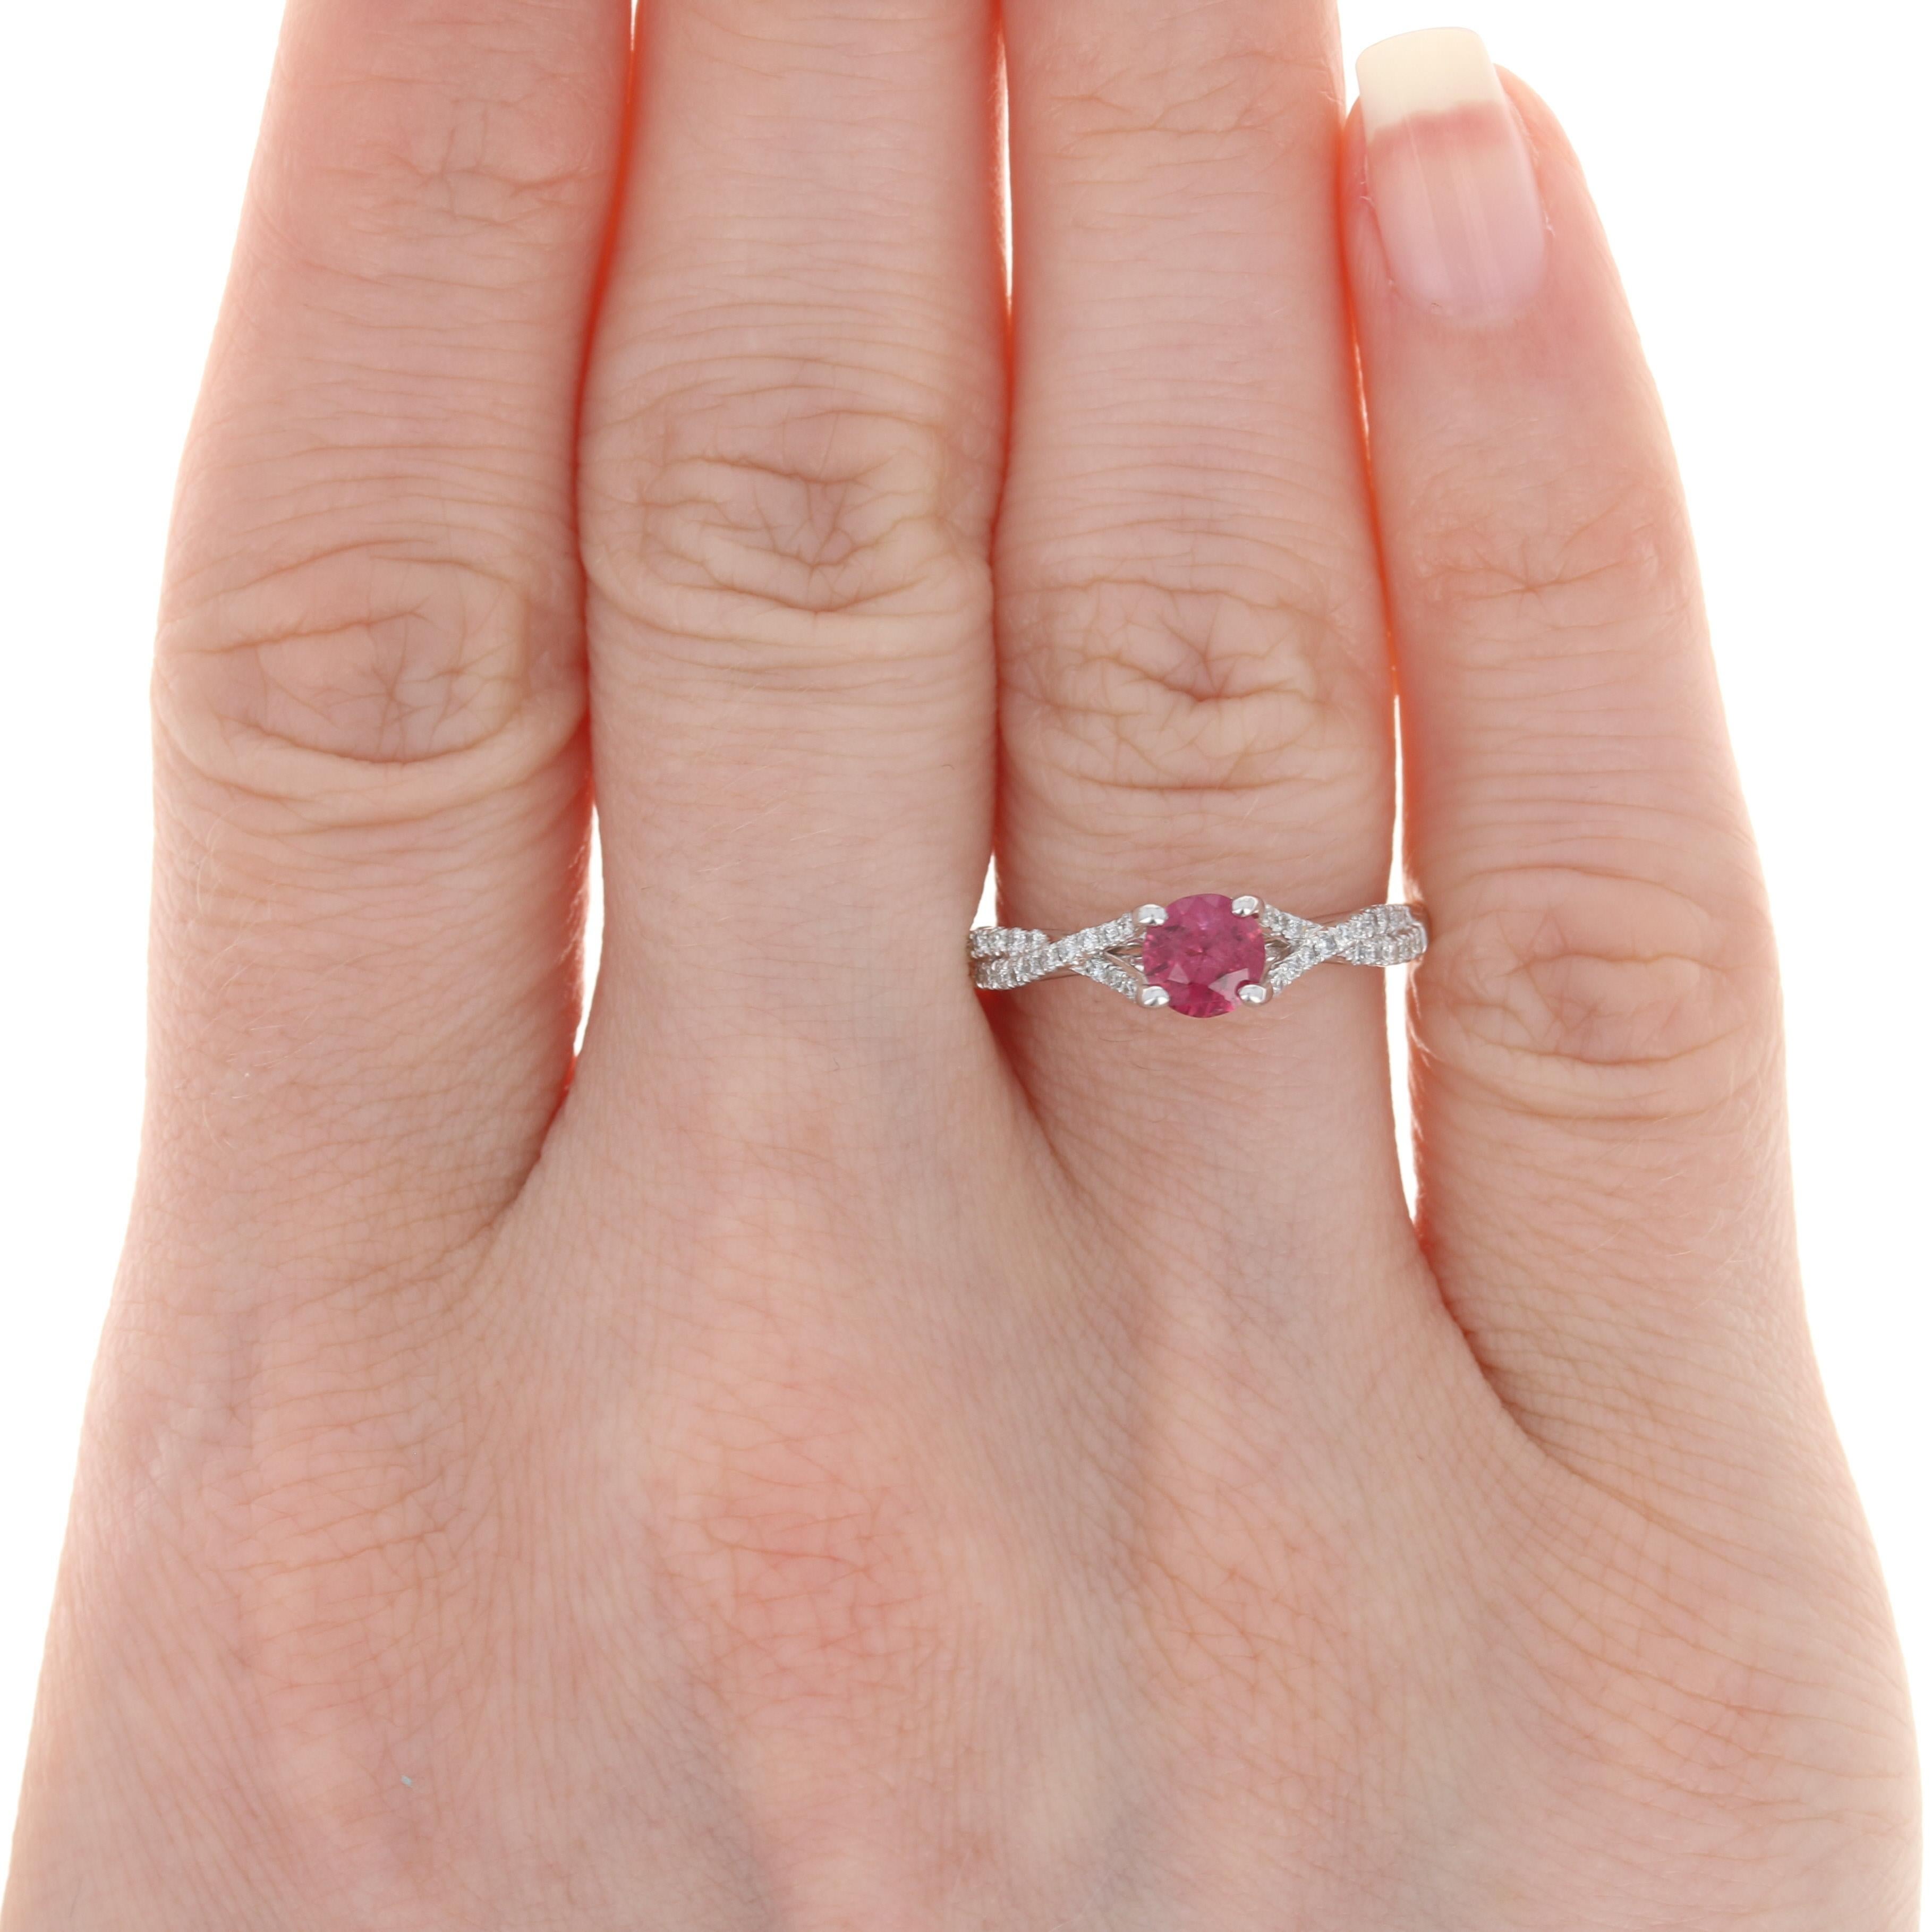 Your quest for the perfect birthday or anniversary gift ends here with this exquisite ring! Fashioned in popular 14K white gold, this NEW ring features a genuine ruby in a half-bezel mounting adorned with peek-a-boo diamond accents. More accent